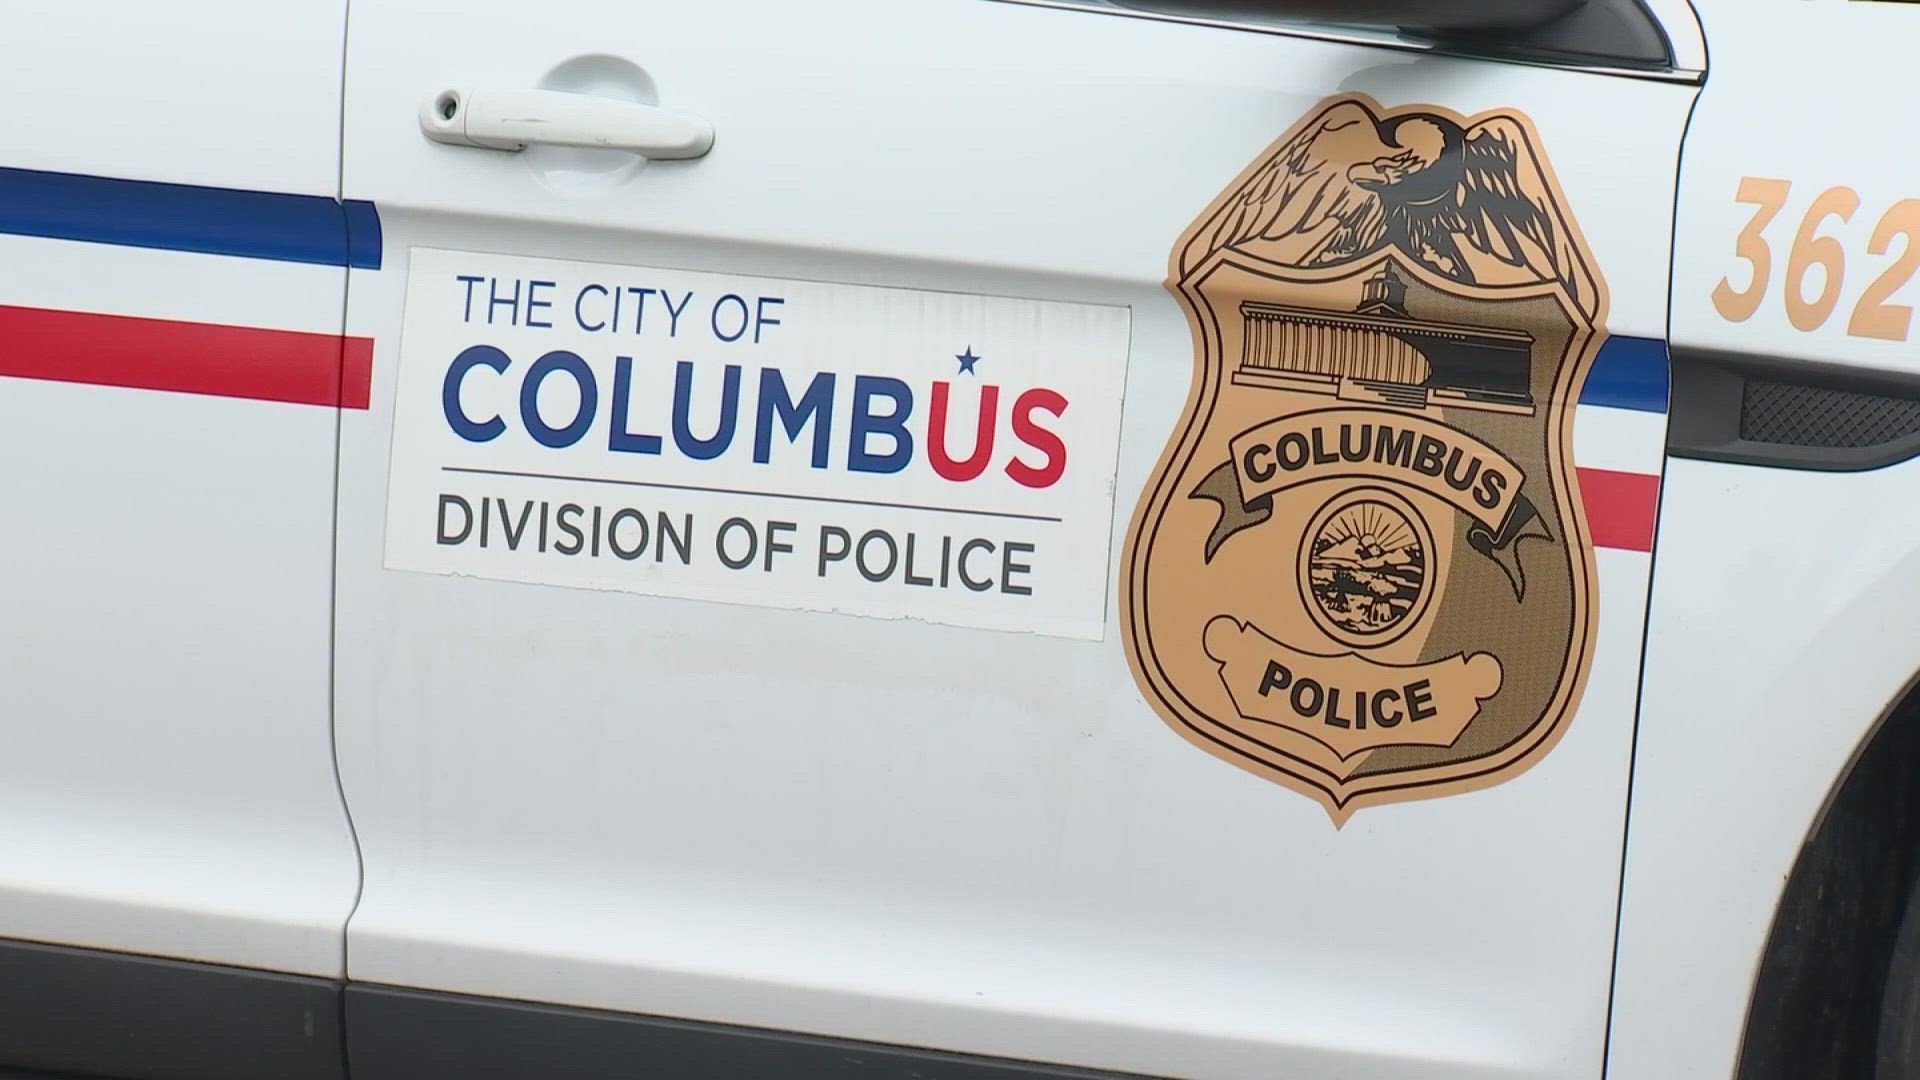 Columbus police confirmed to 10TV on Monday that the officer was relieved of duty after his arrest and is required to turn in his gun and badge.